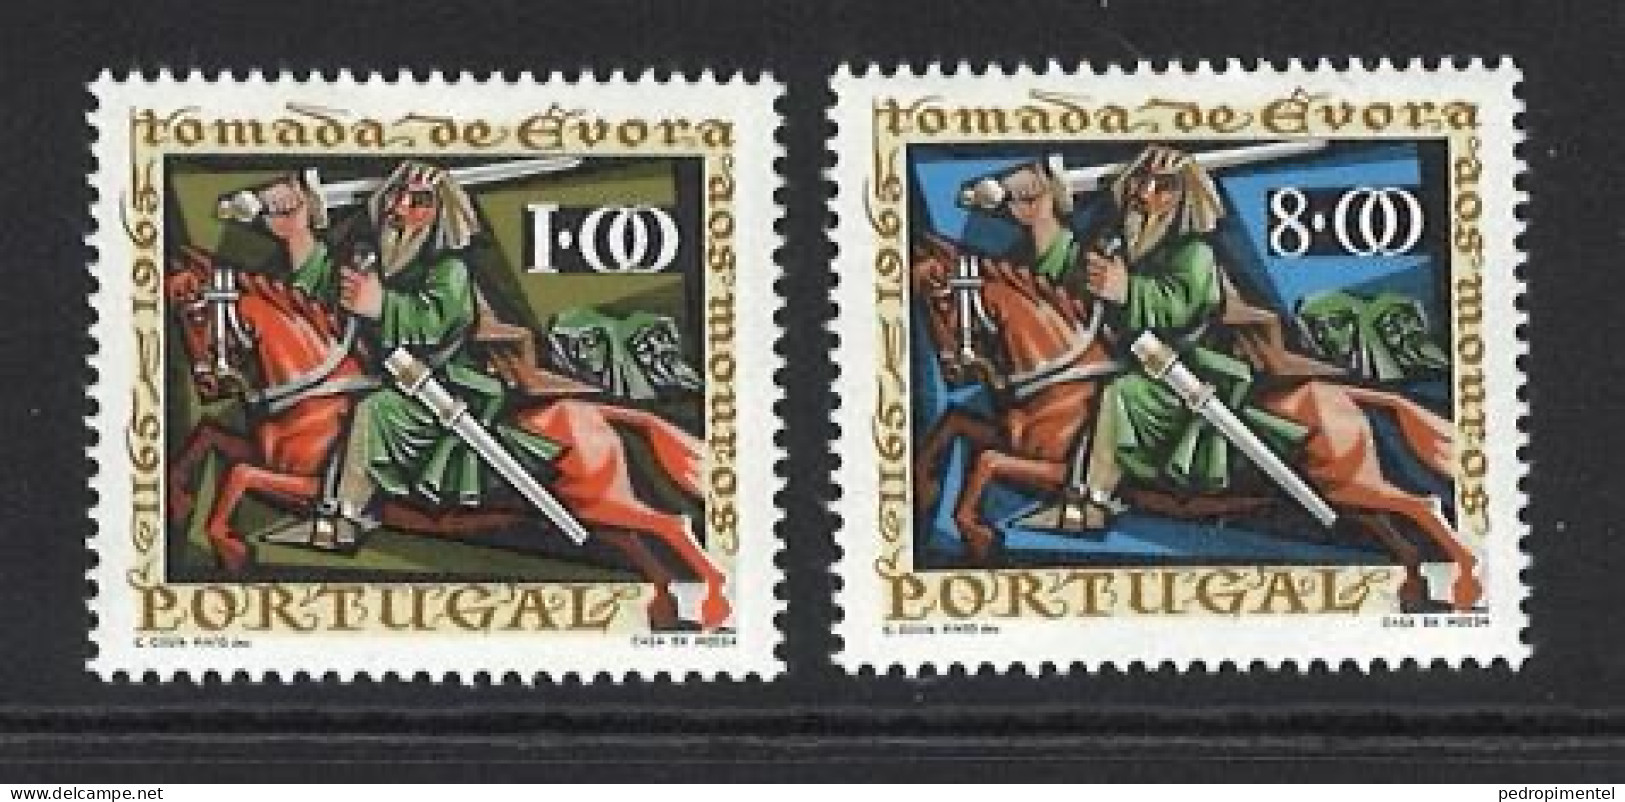 Portugal Stamps 1966 "Conquest Of Evora" Condition MHH #977-978 - Ongebruikt